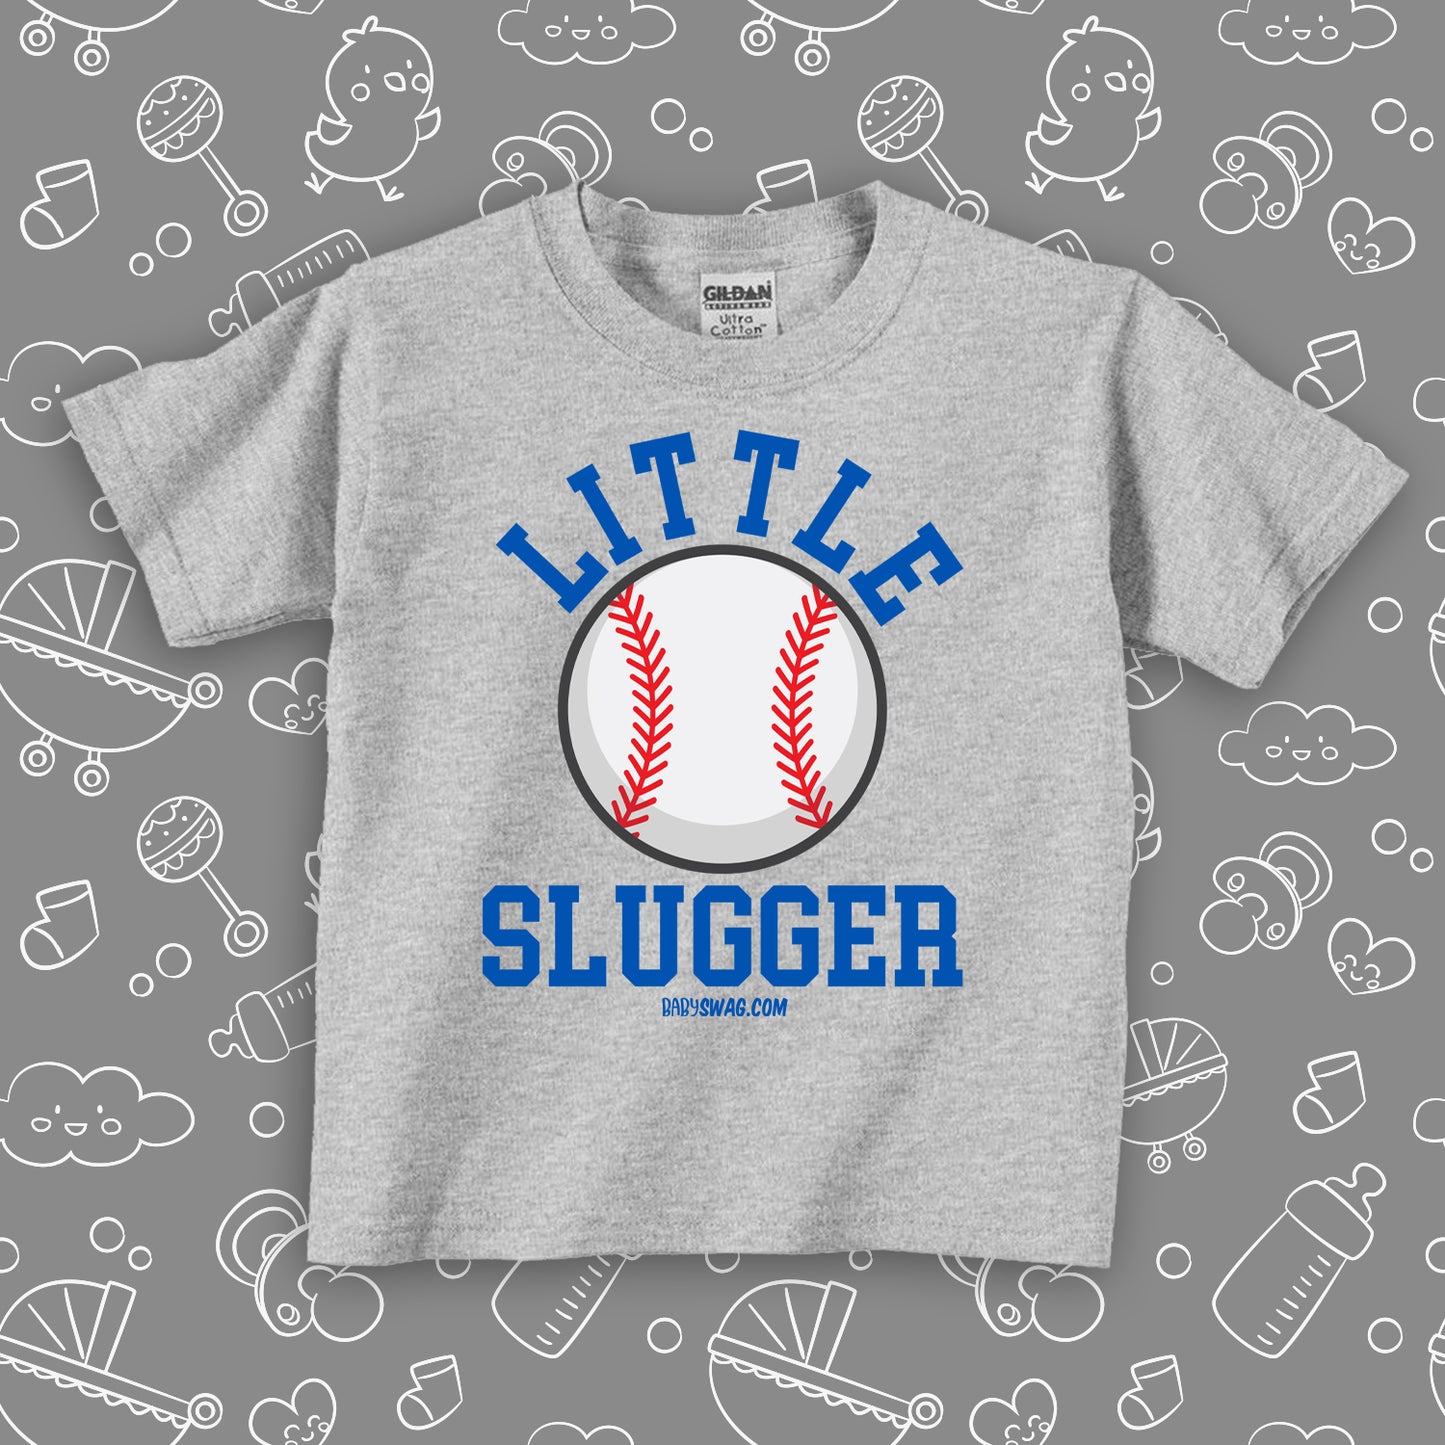 Toddler boy graphich tees with saying "Little Slugger" in grey. 